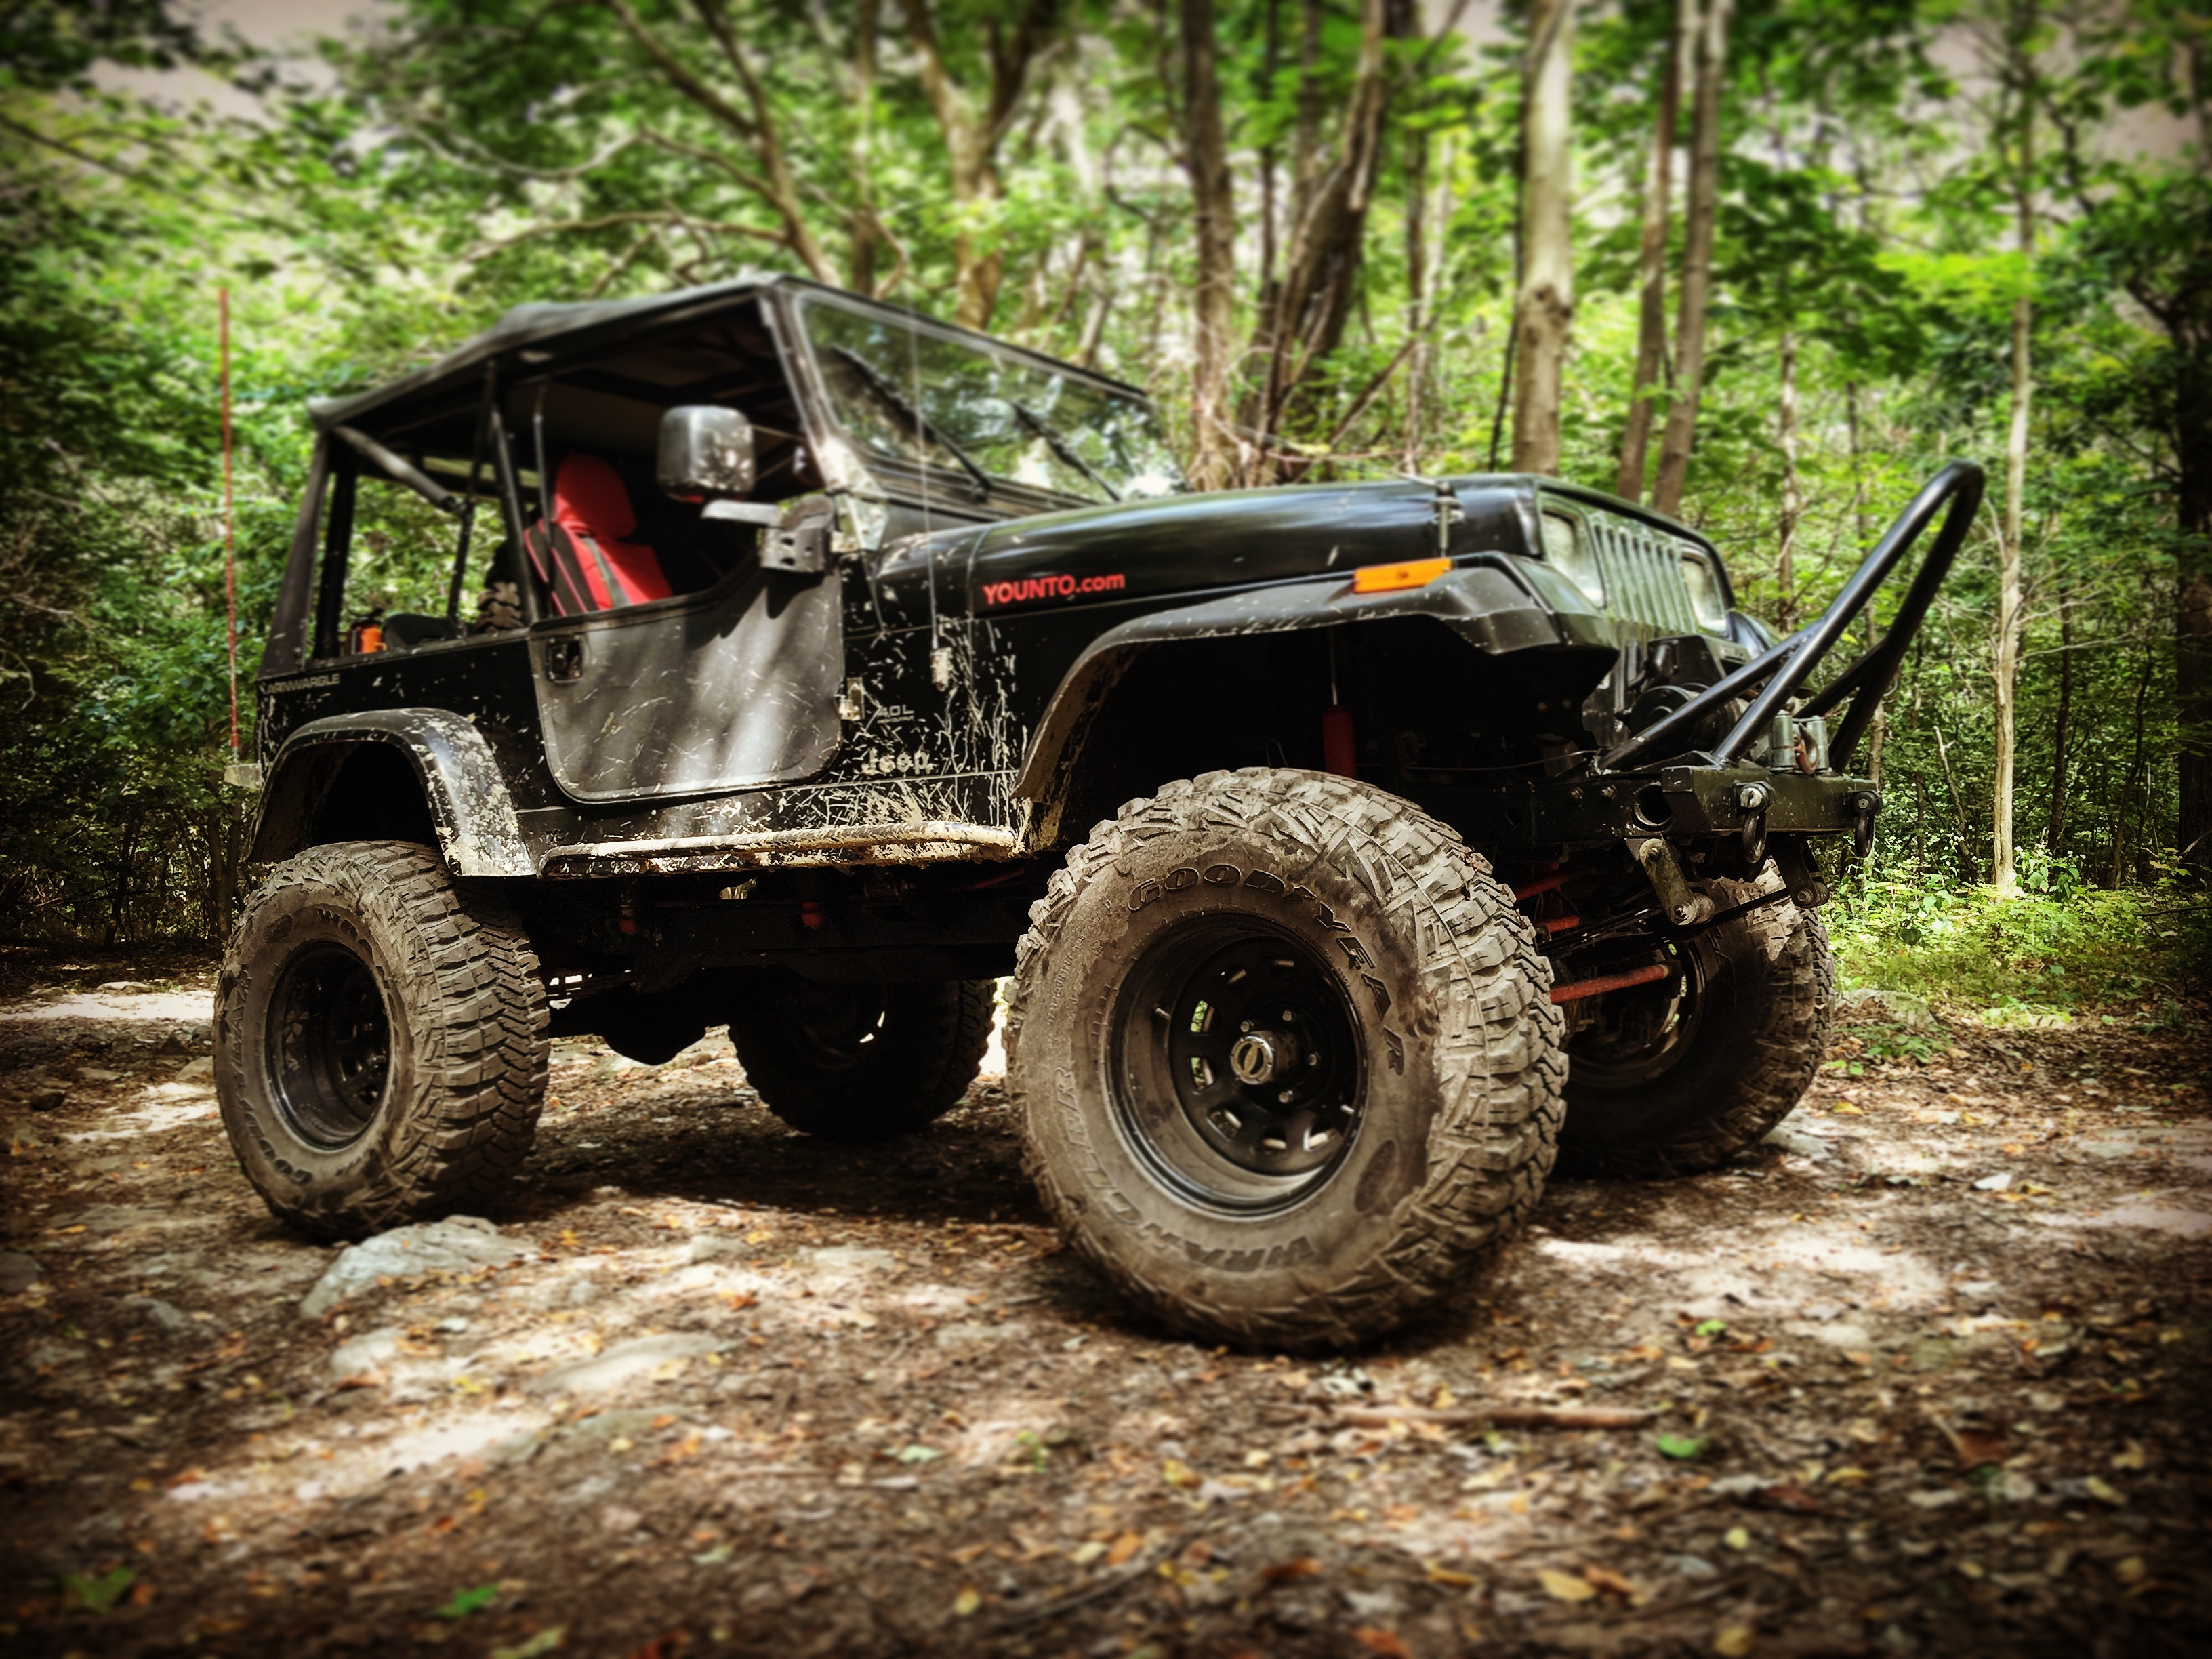 Project Arnwrgle: the Ultimate SOA Jeep YJ - OCD Offroad